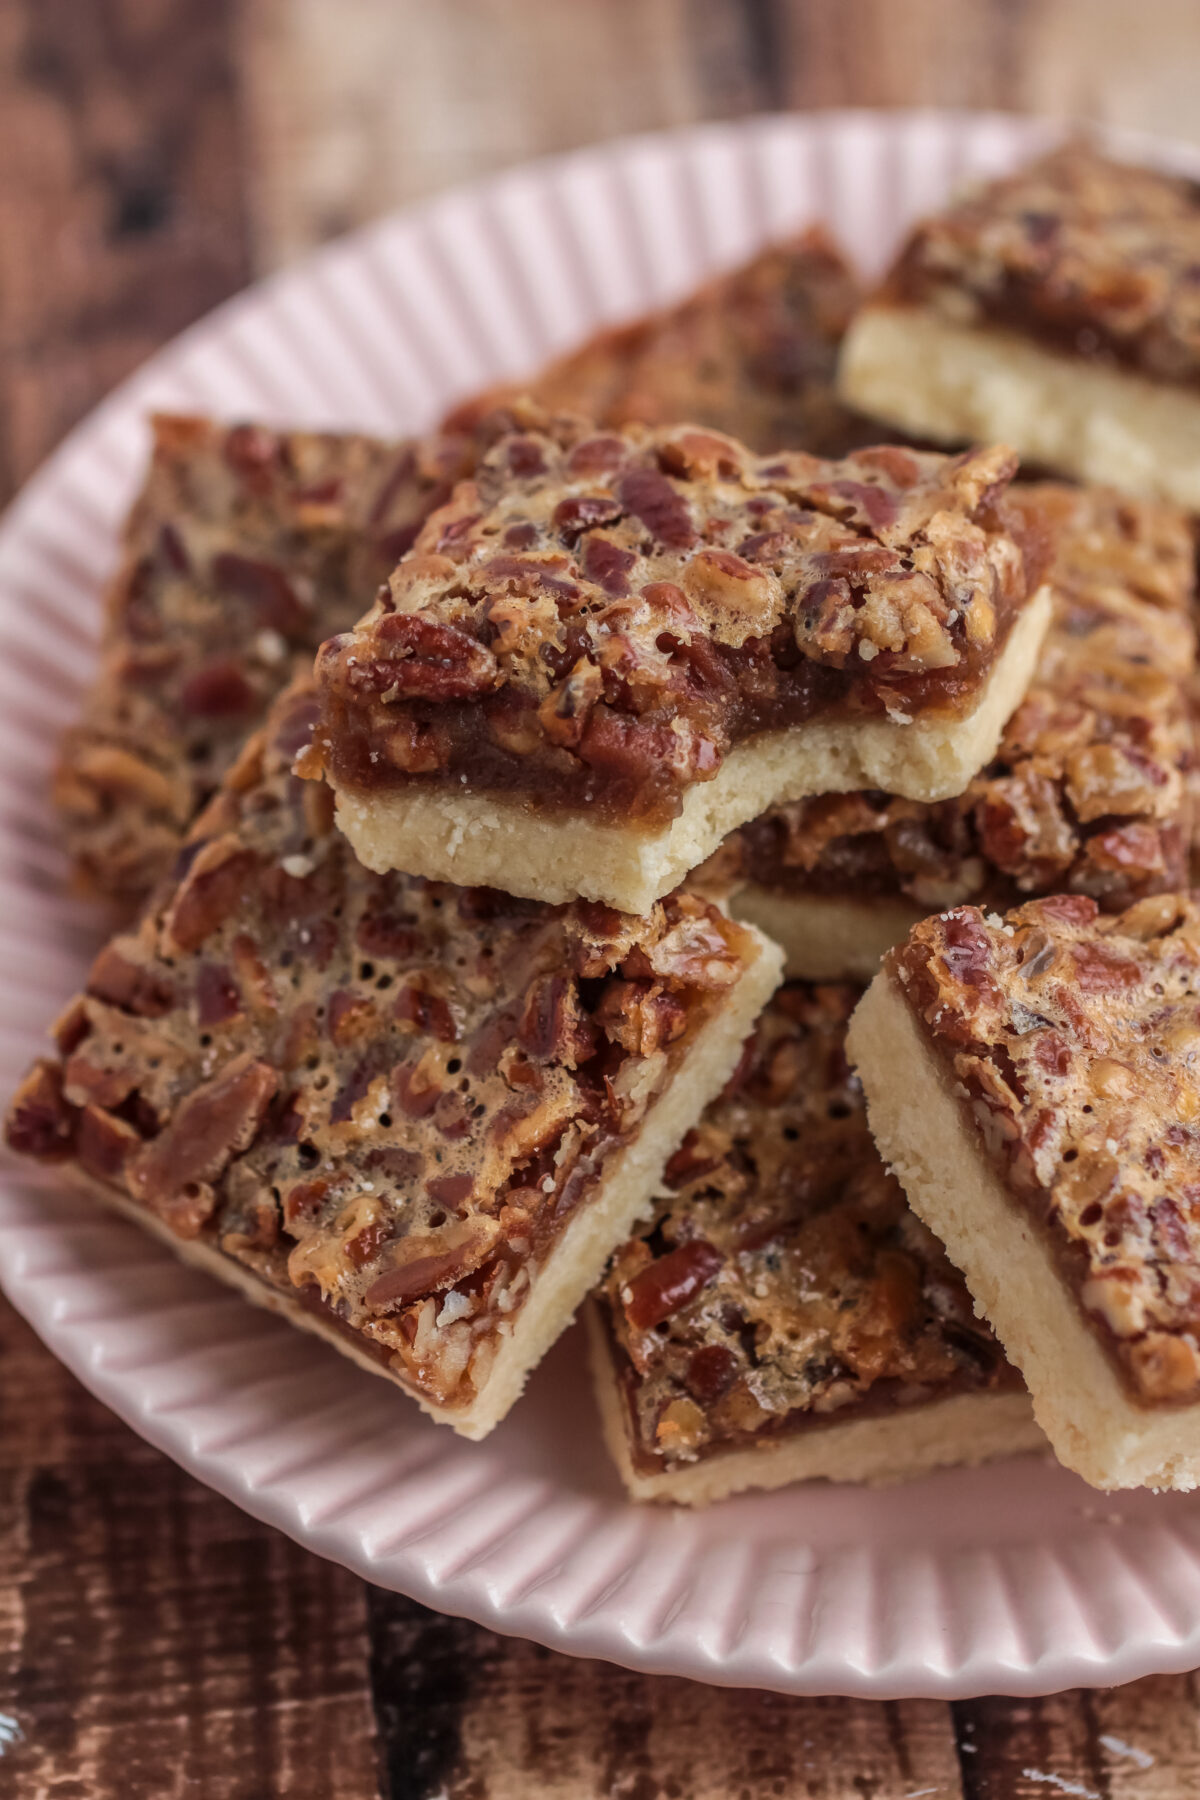 These pecan pie bars are the best dessert for family gatherings! With a gooey filling, and loads of pecans, they're sure to be a hit.